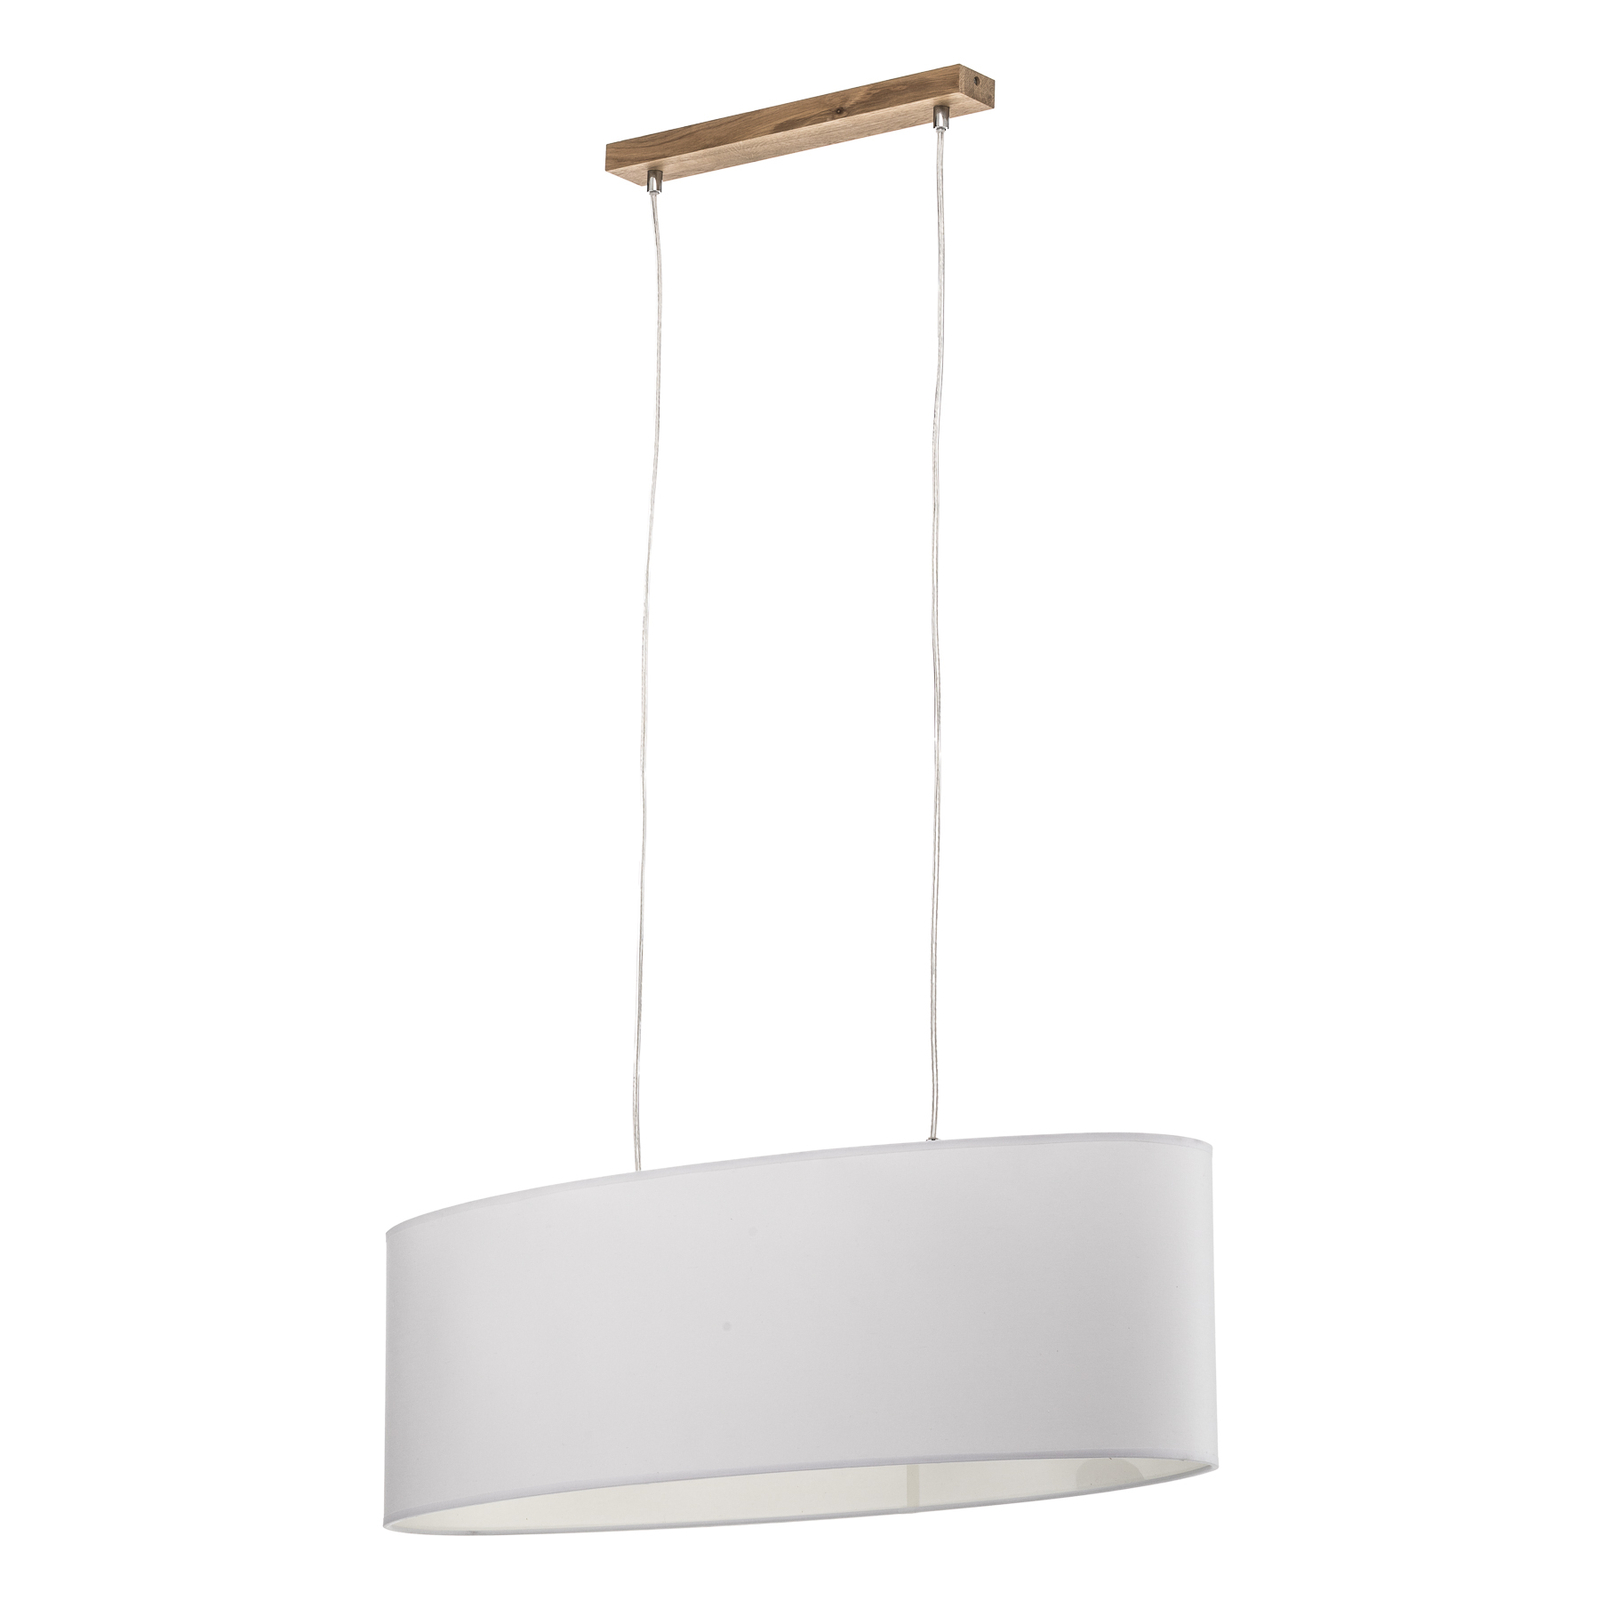 Cassy hanging light with a white fabric lampshade